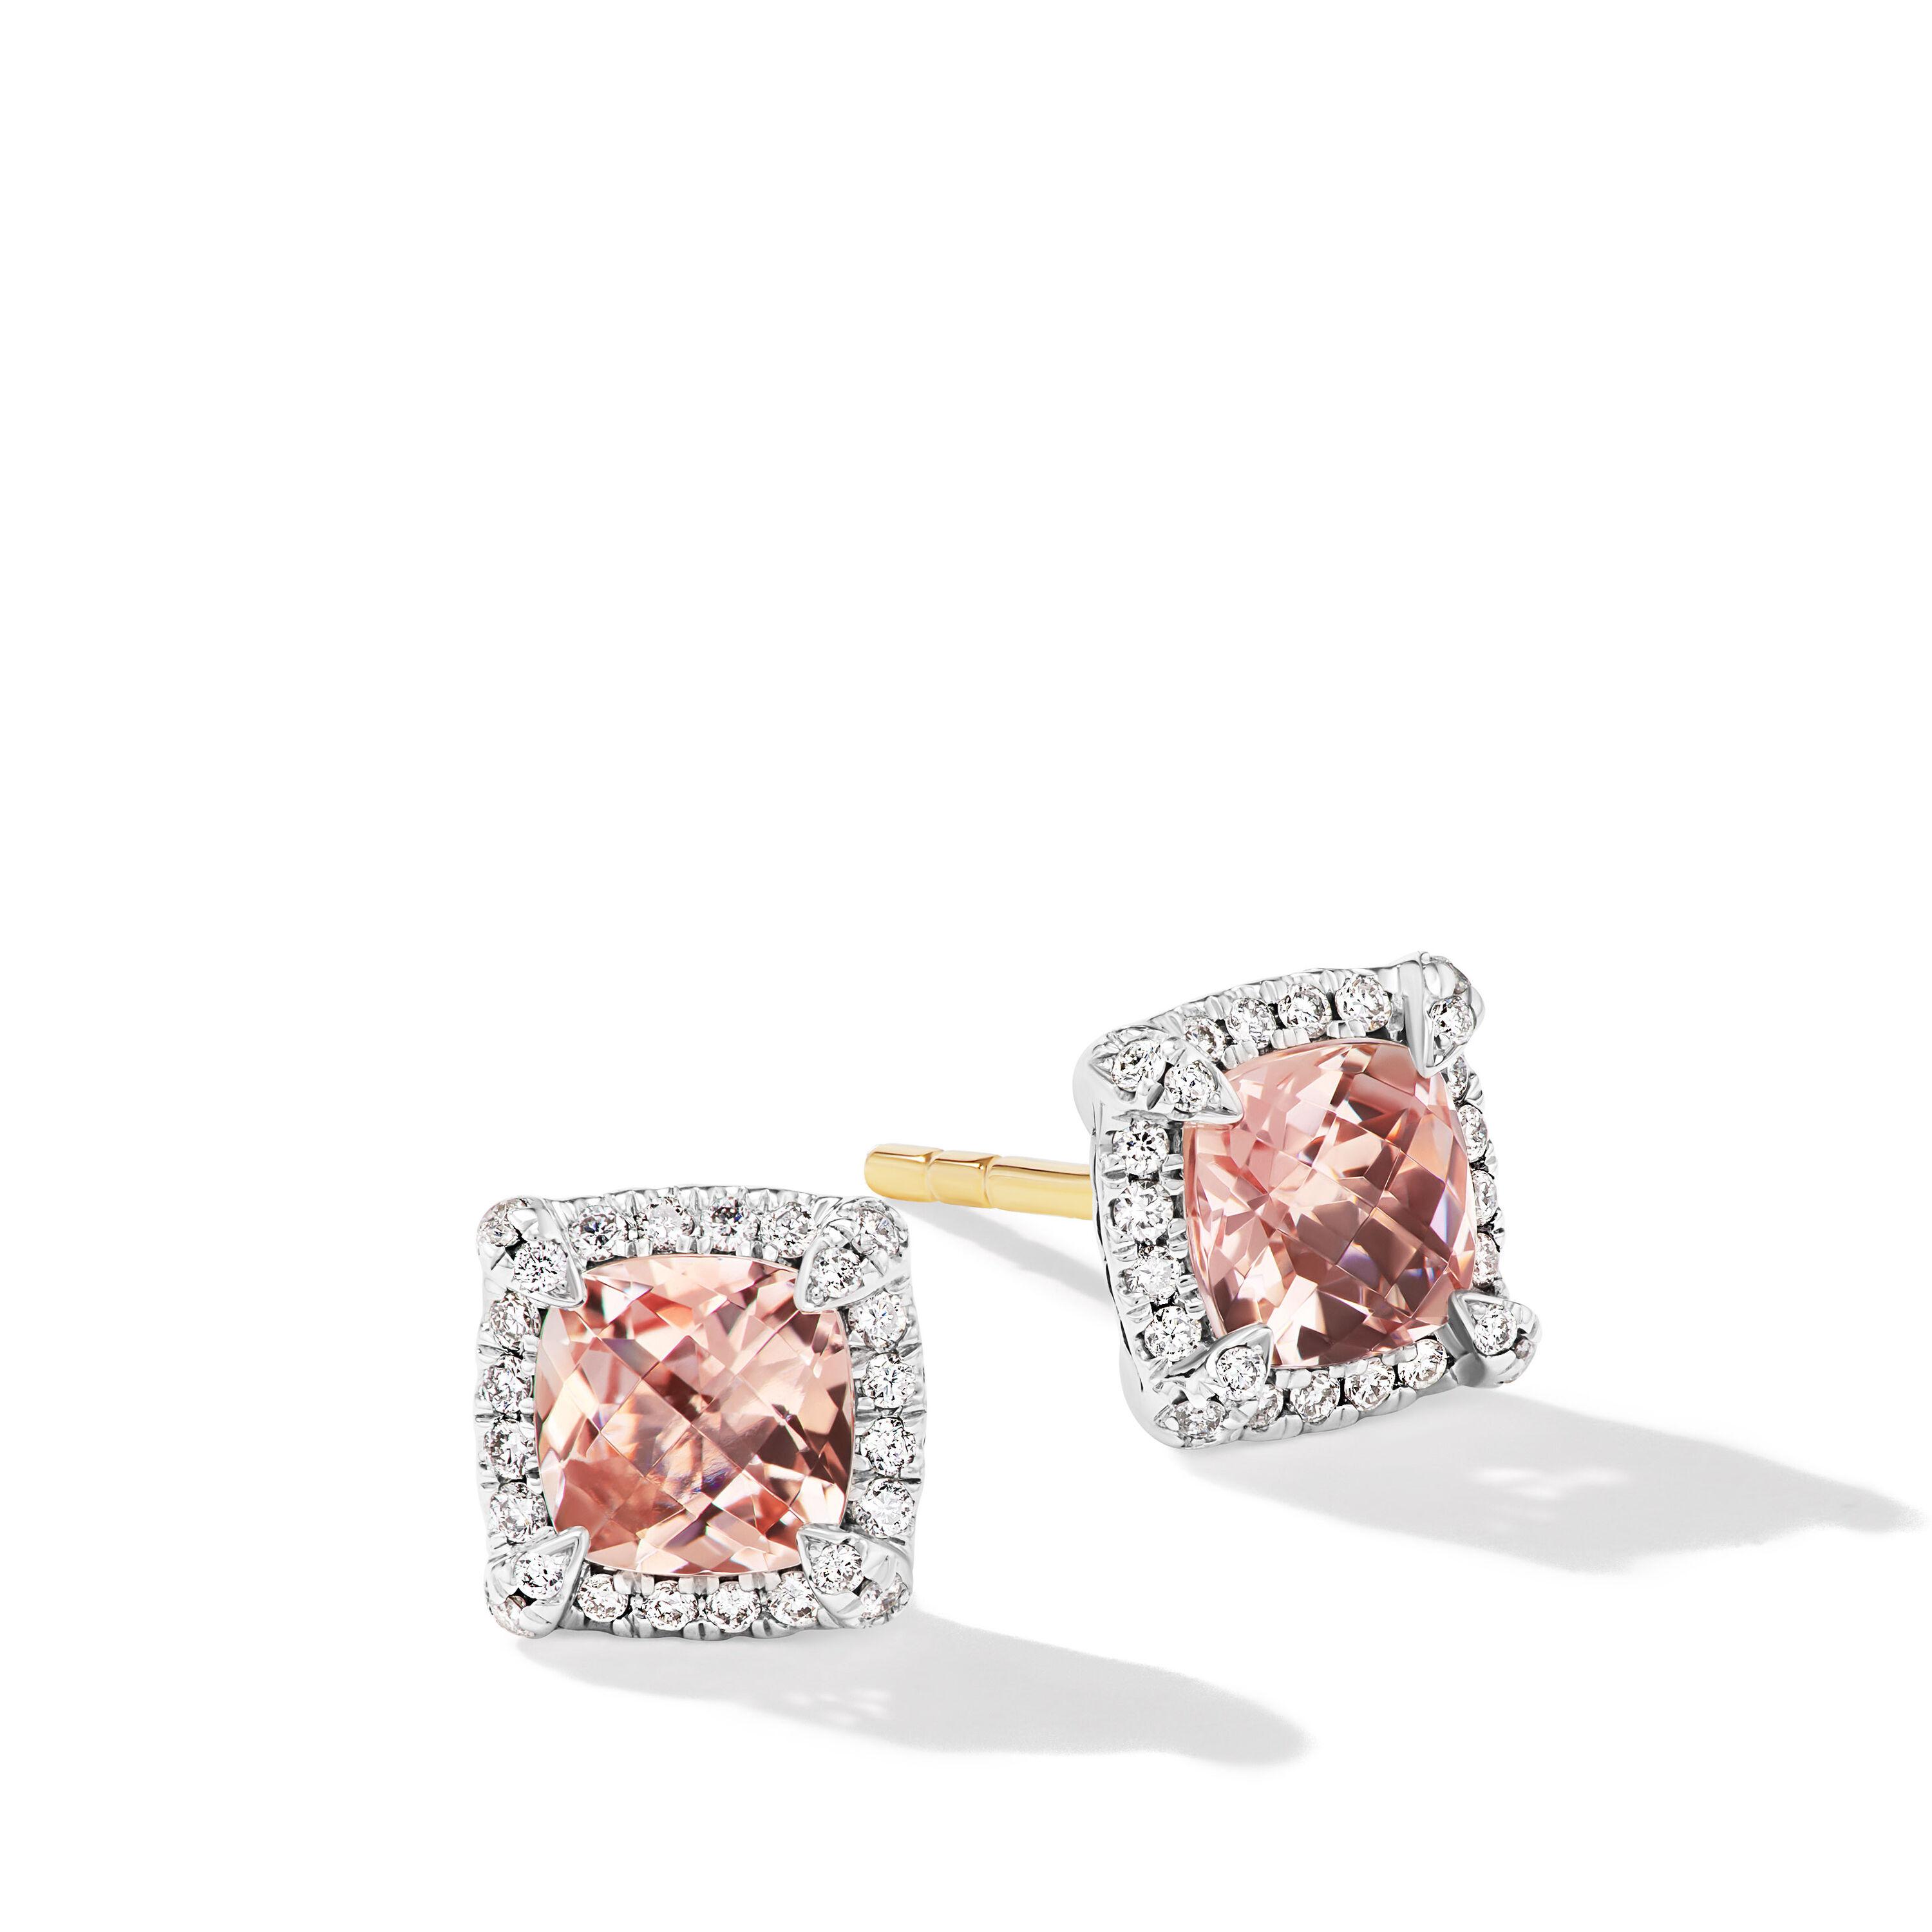 David Yurman Petite Chatelaine Pave Bezel Stud Earrings in Sterling Silver with Morganite and Diamonds 0